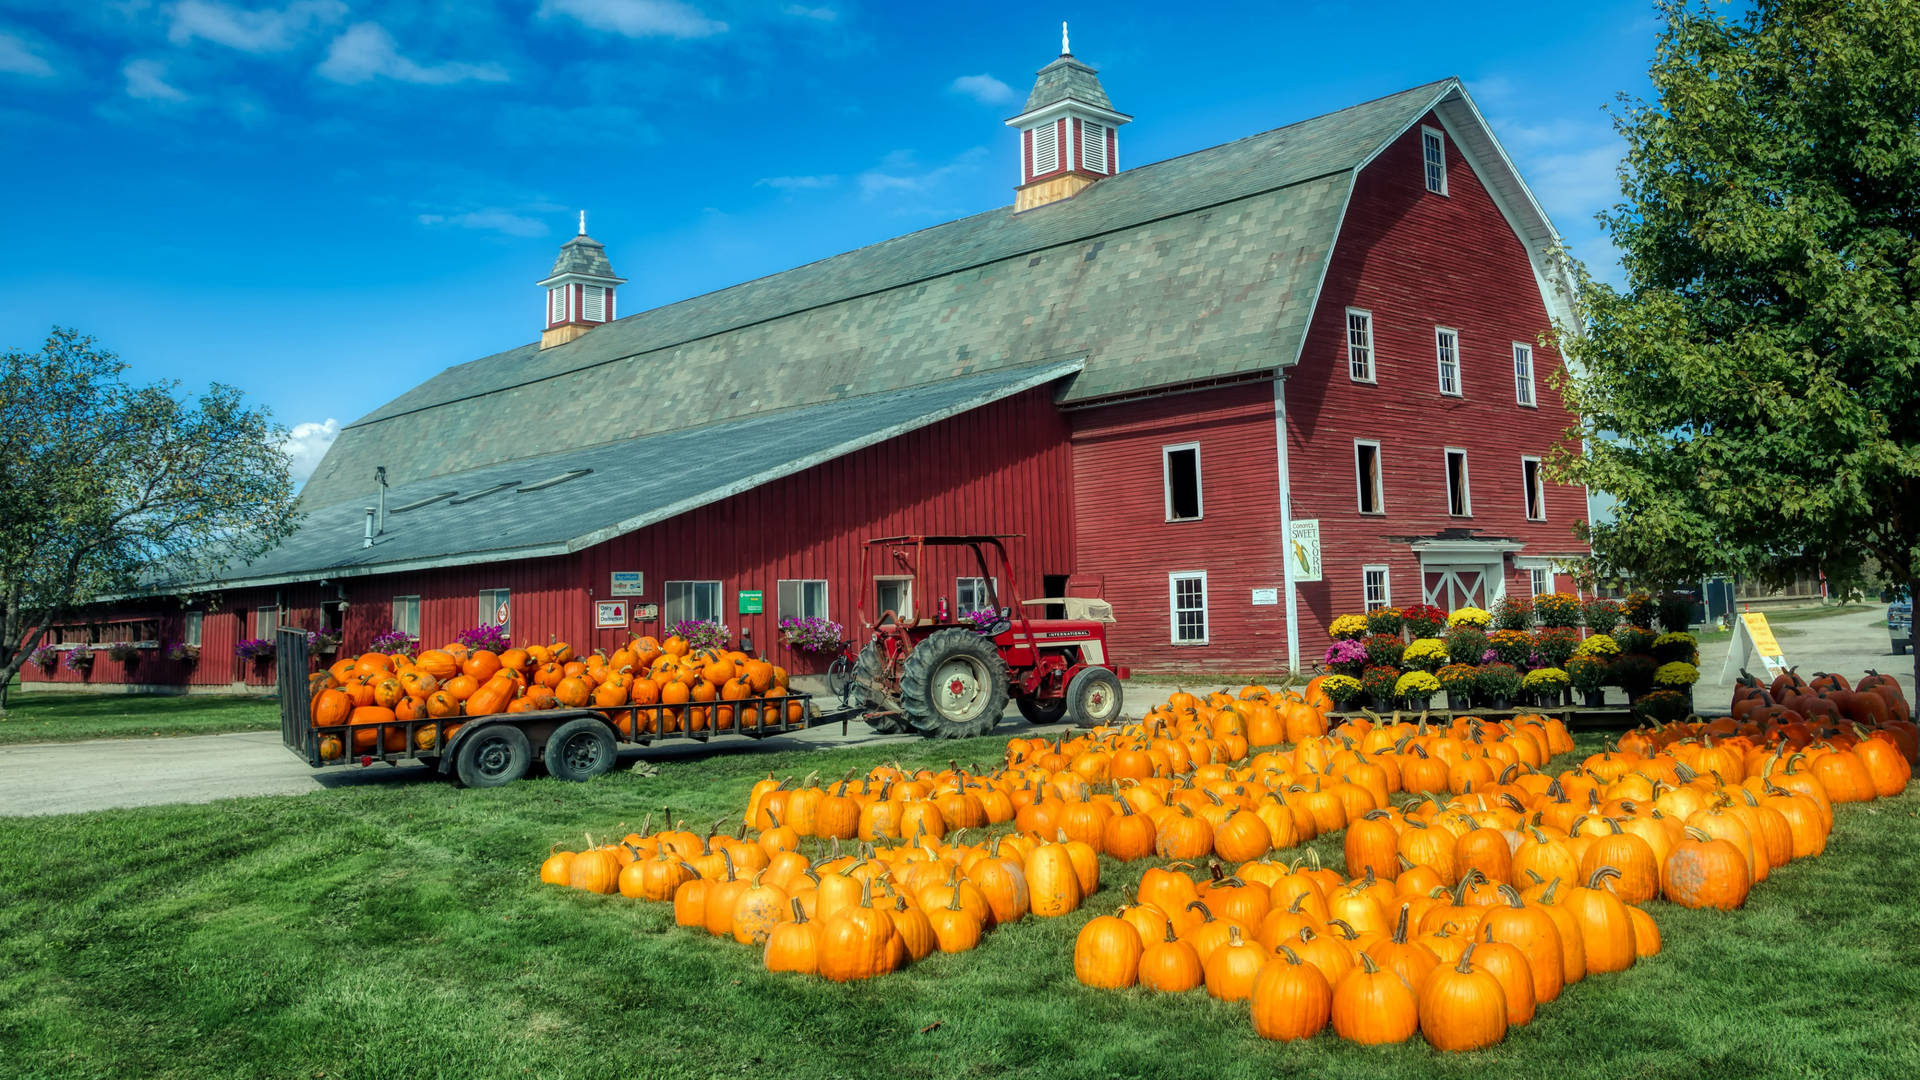 Vermont Red Barn And Pumpkins Wallpaper